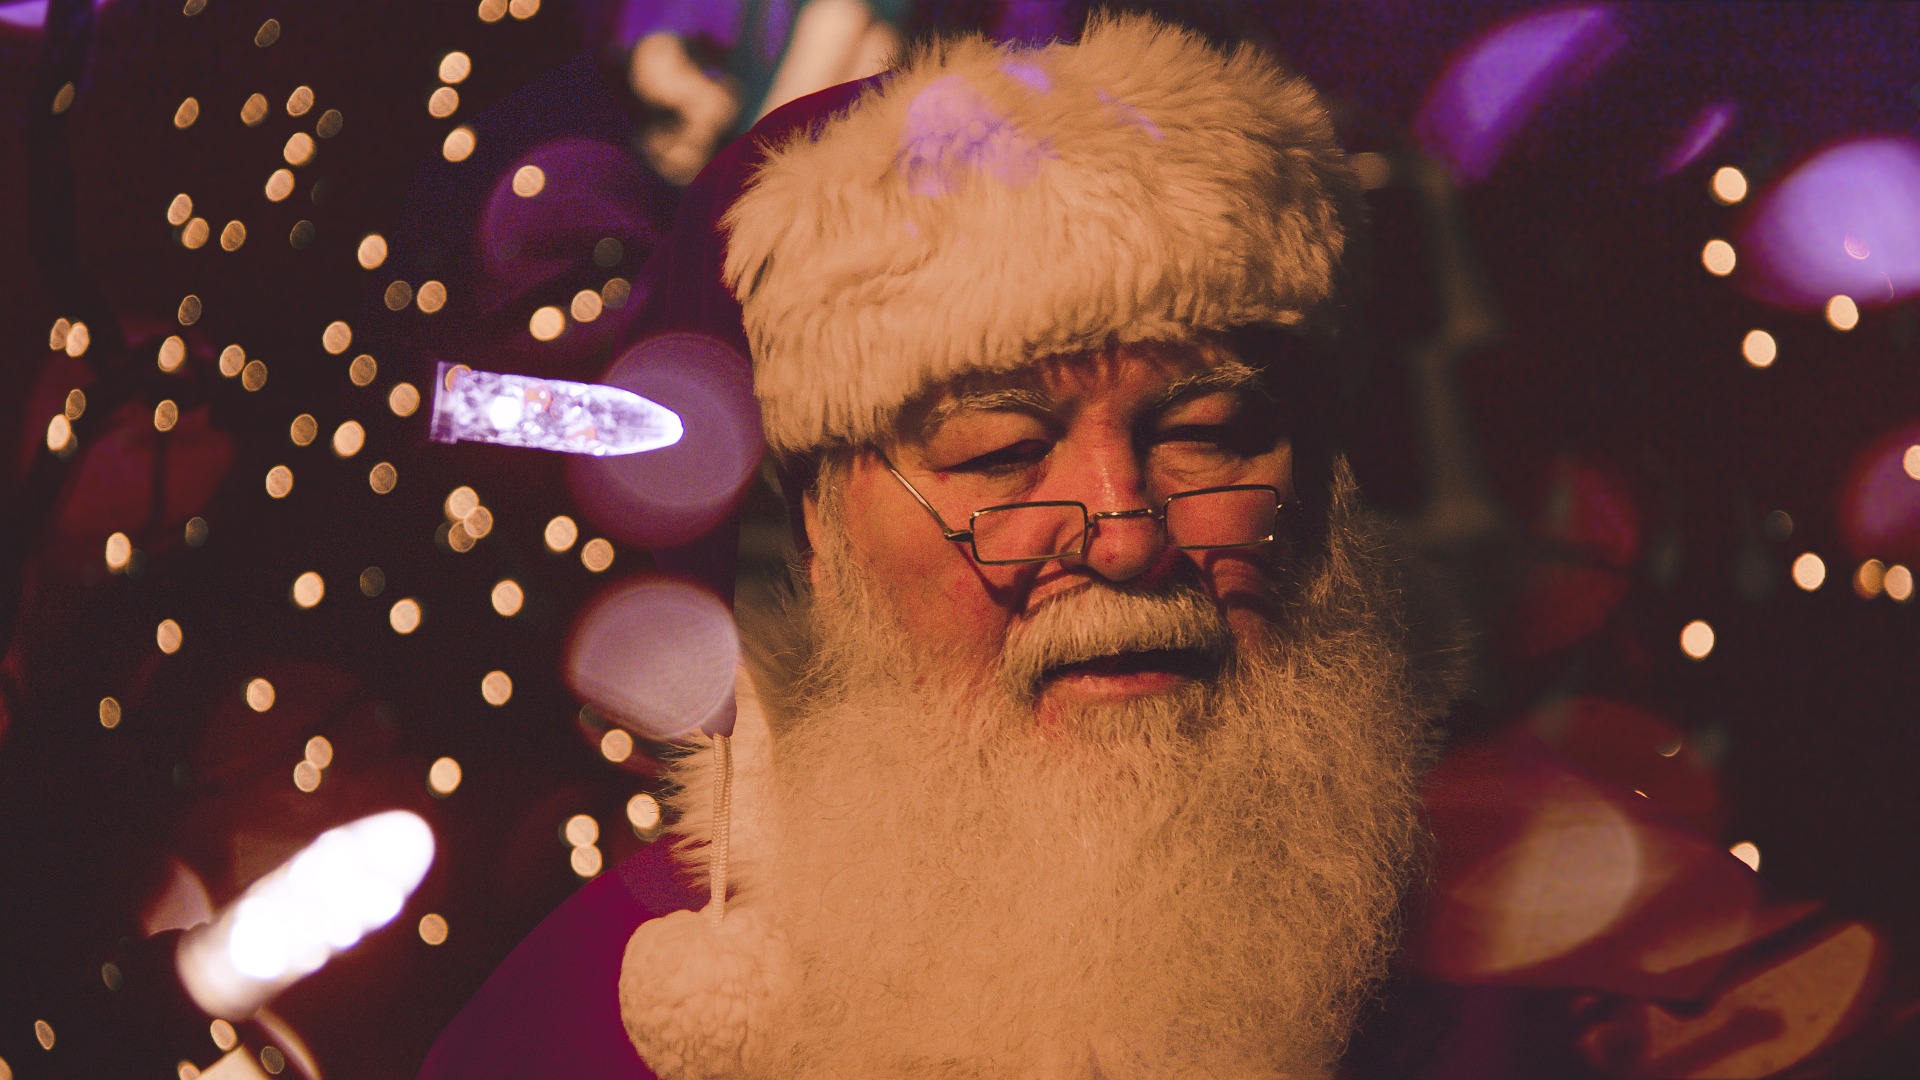 Santa Claus: Old man with white beard, father christmas